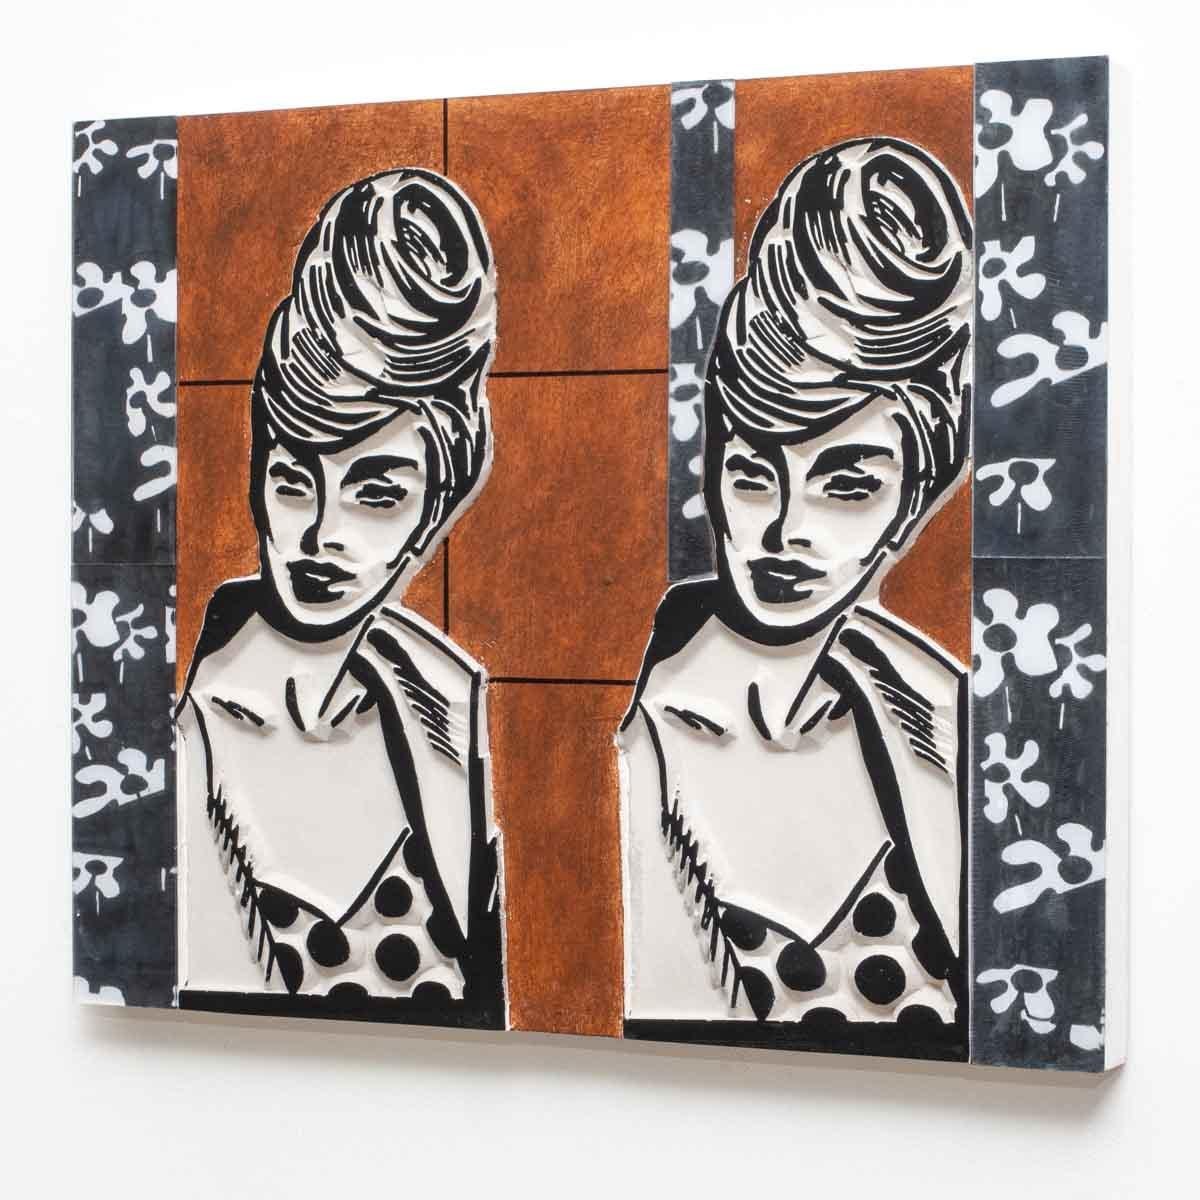 Wall sculpture in relief and mixed media.
Material: concrete, wood, acrylic glass and acrylic paint.
Measurements: 61 x 50 cm.
Limited and signed edition of 6 examples.
Julia, the woman is in partly painted concrete and a relief with a 10 mm